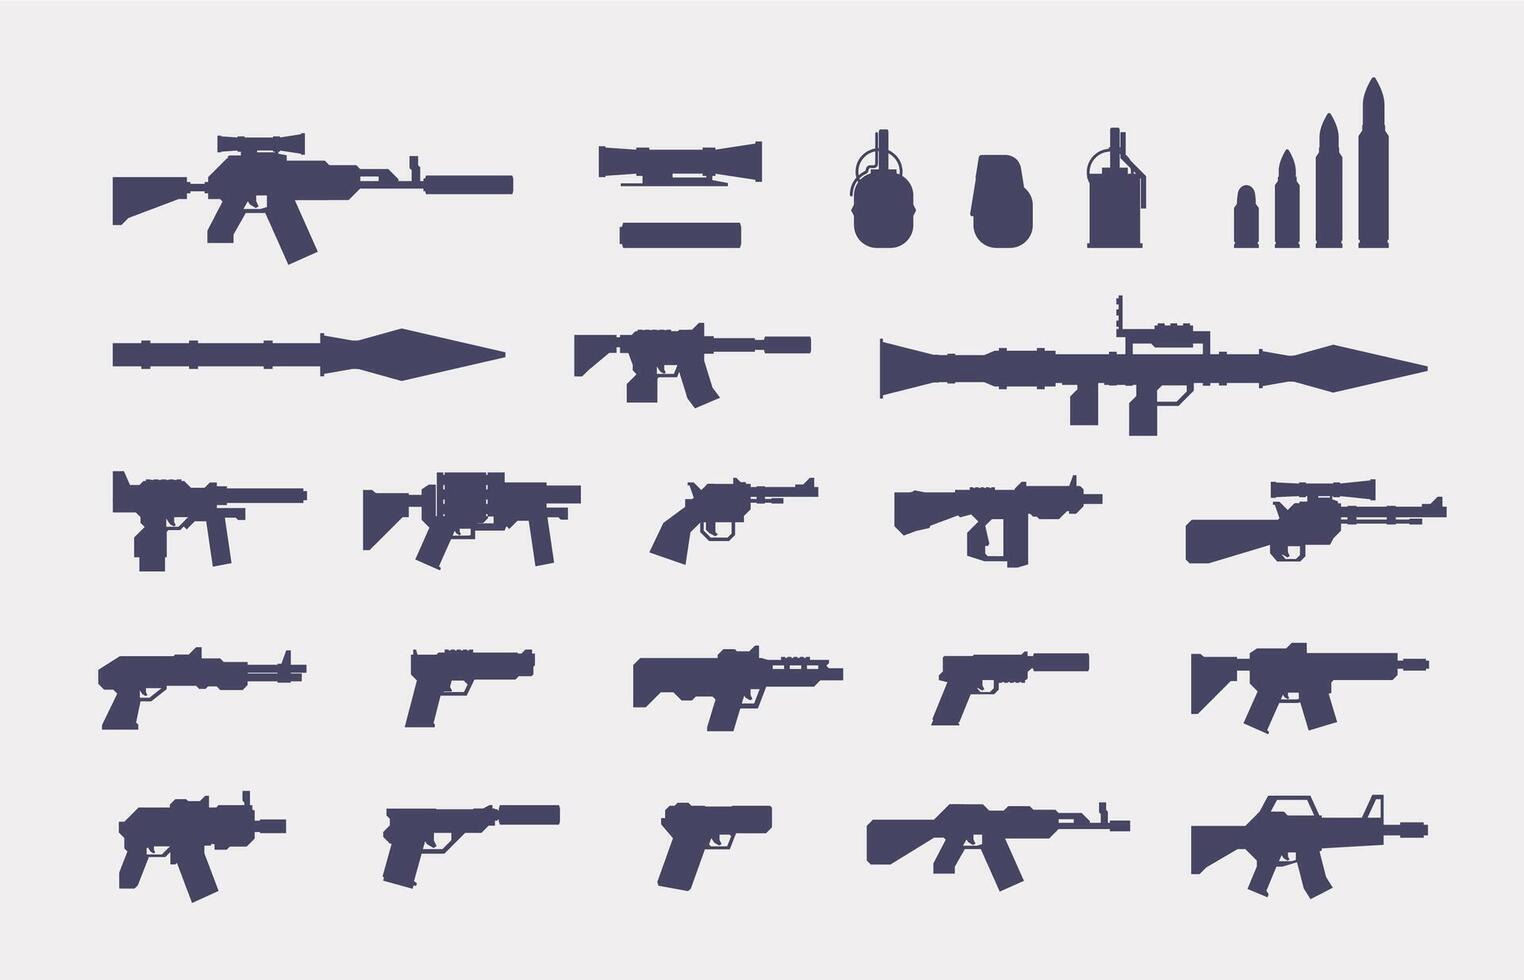 Guns silhouette. Military firearms icons for rpg design, army arsenal weapon and ammo, pistol shotgun grenade revolver launcher. Vector flat set